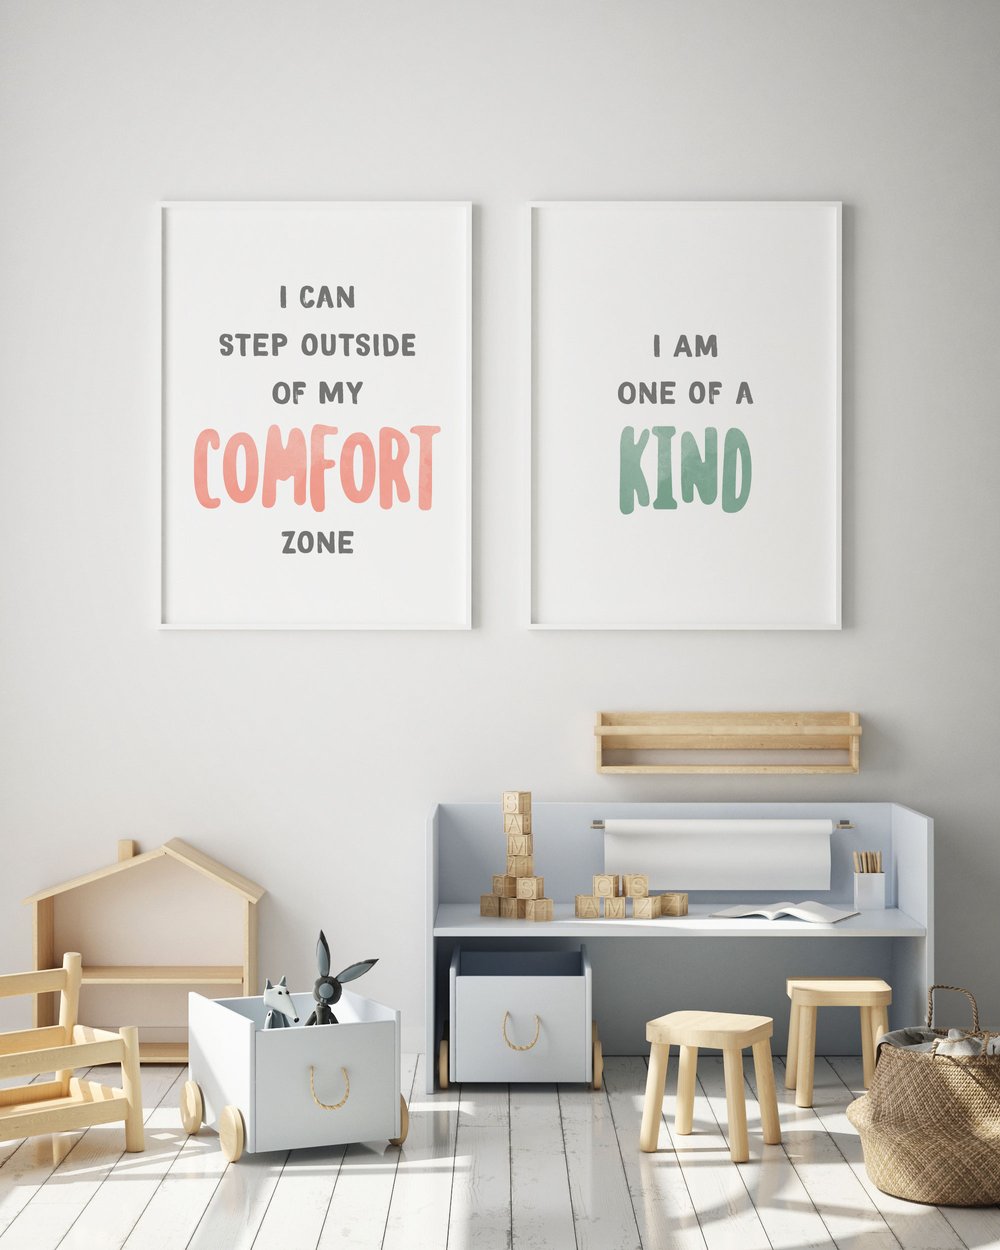 Growth Mindset Poster Pack